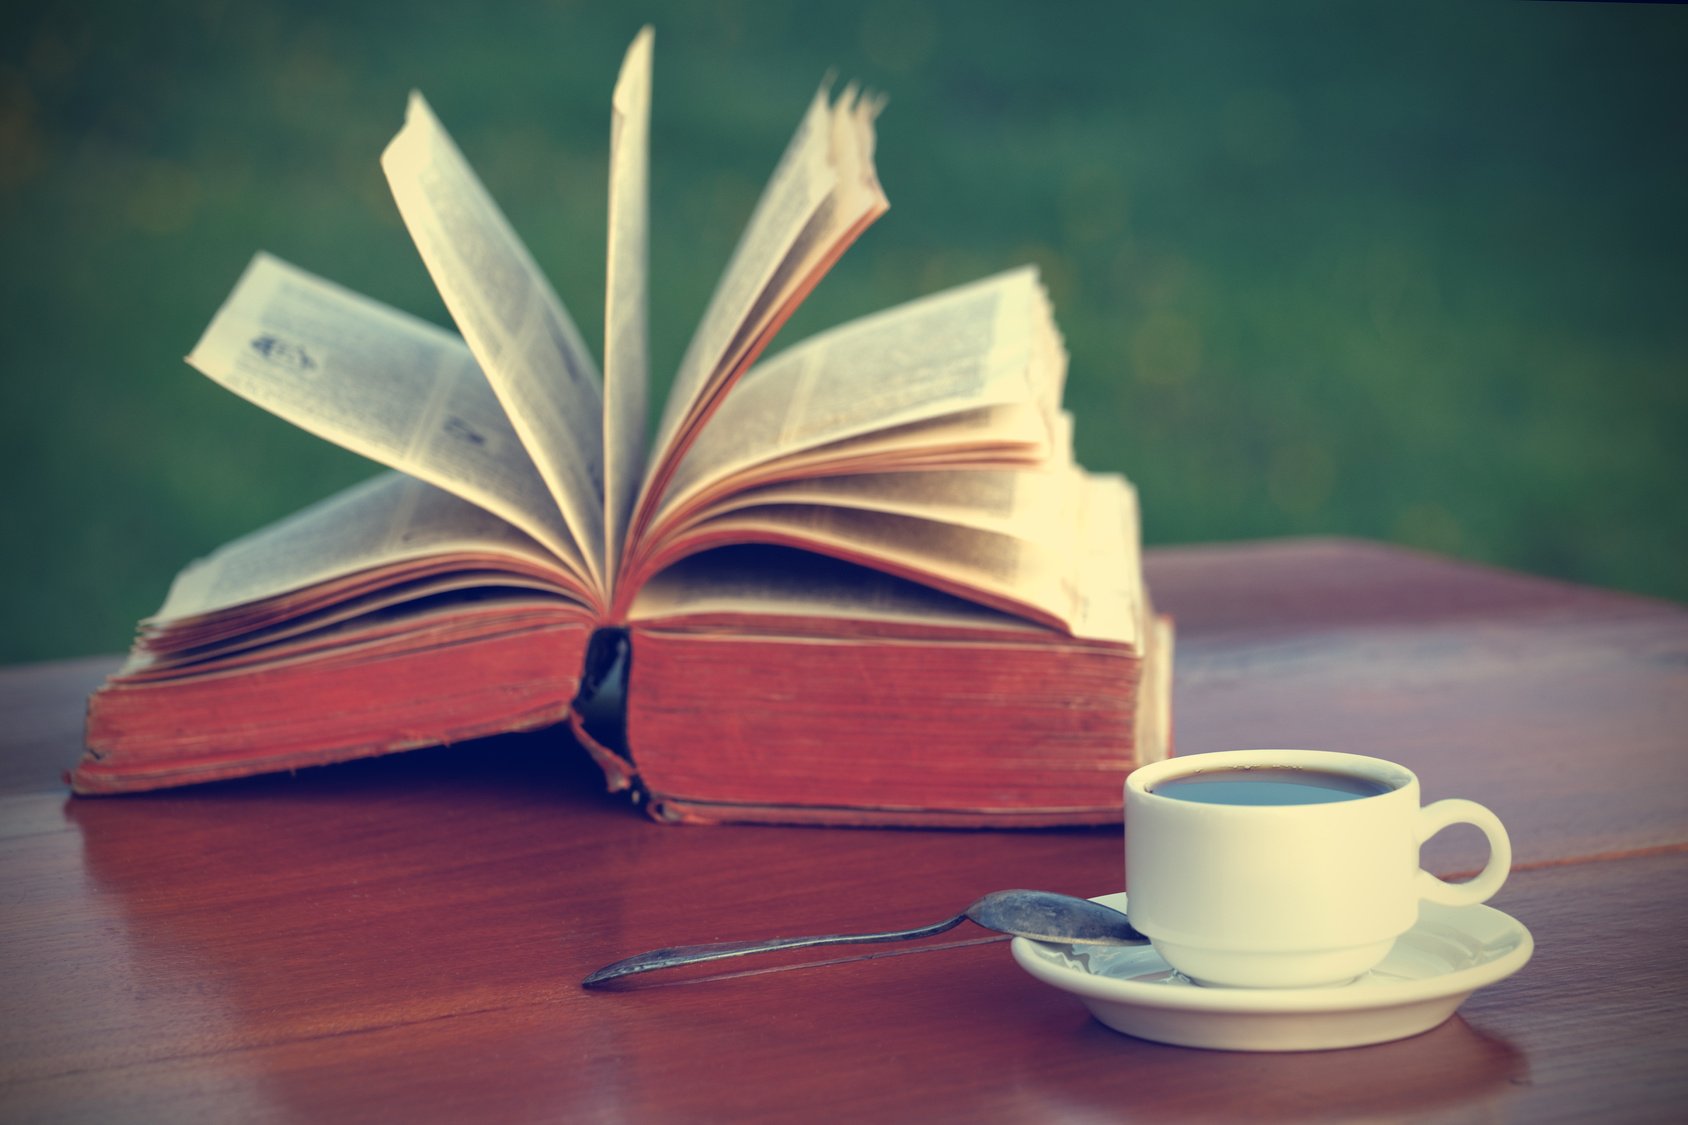 Coffee and book on wooden table-vintage filter